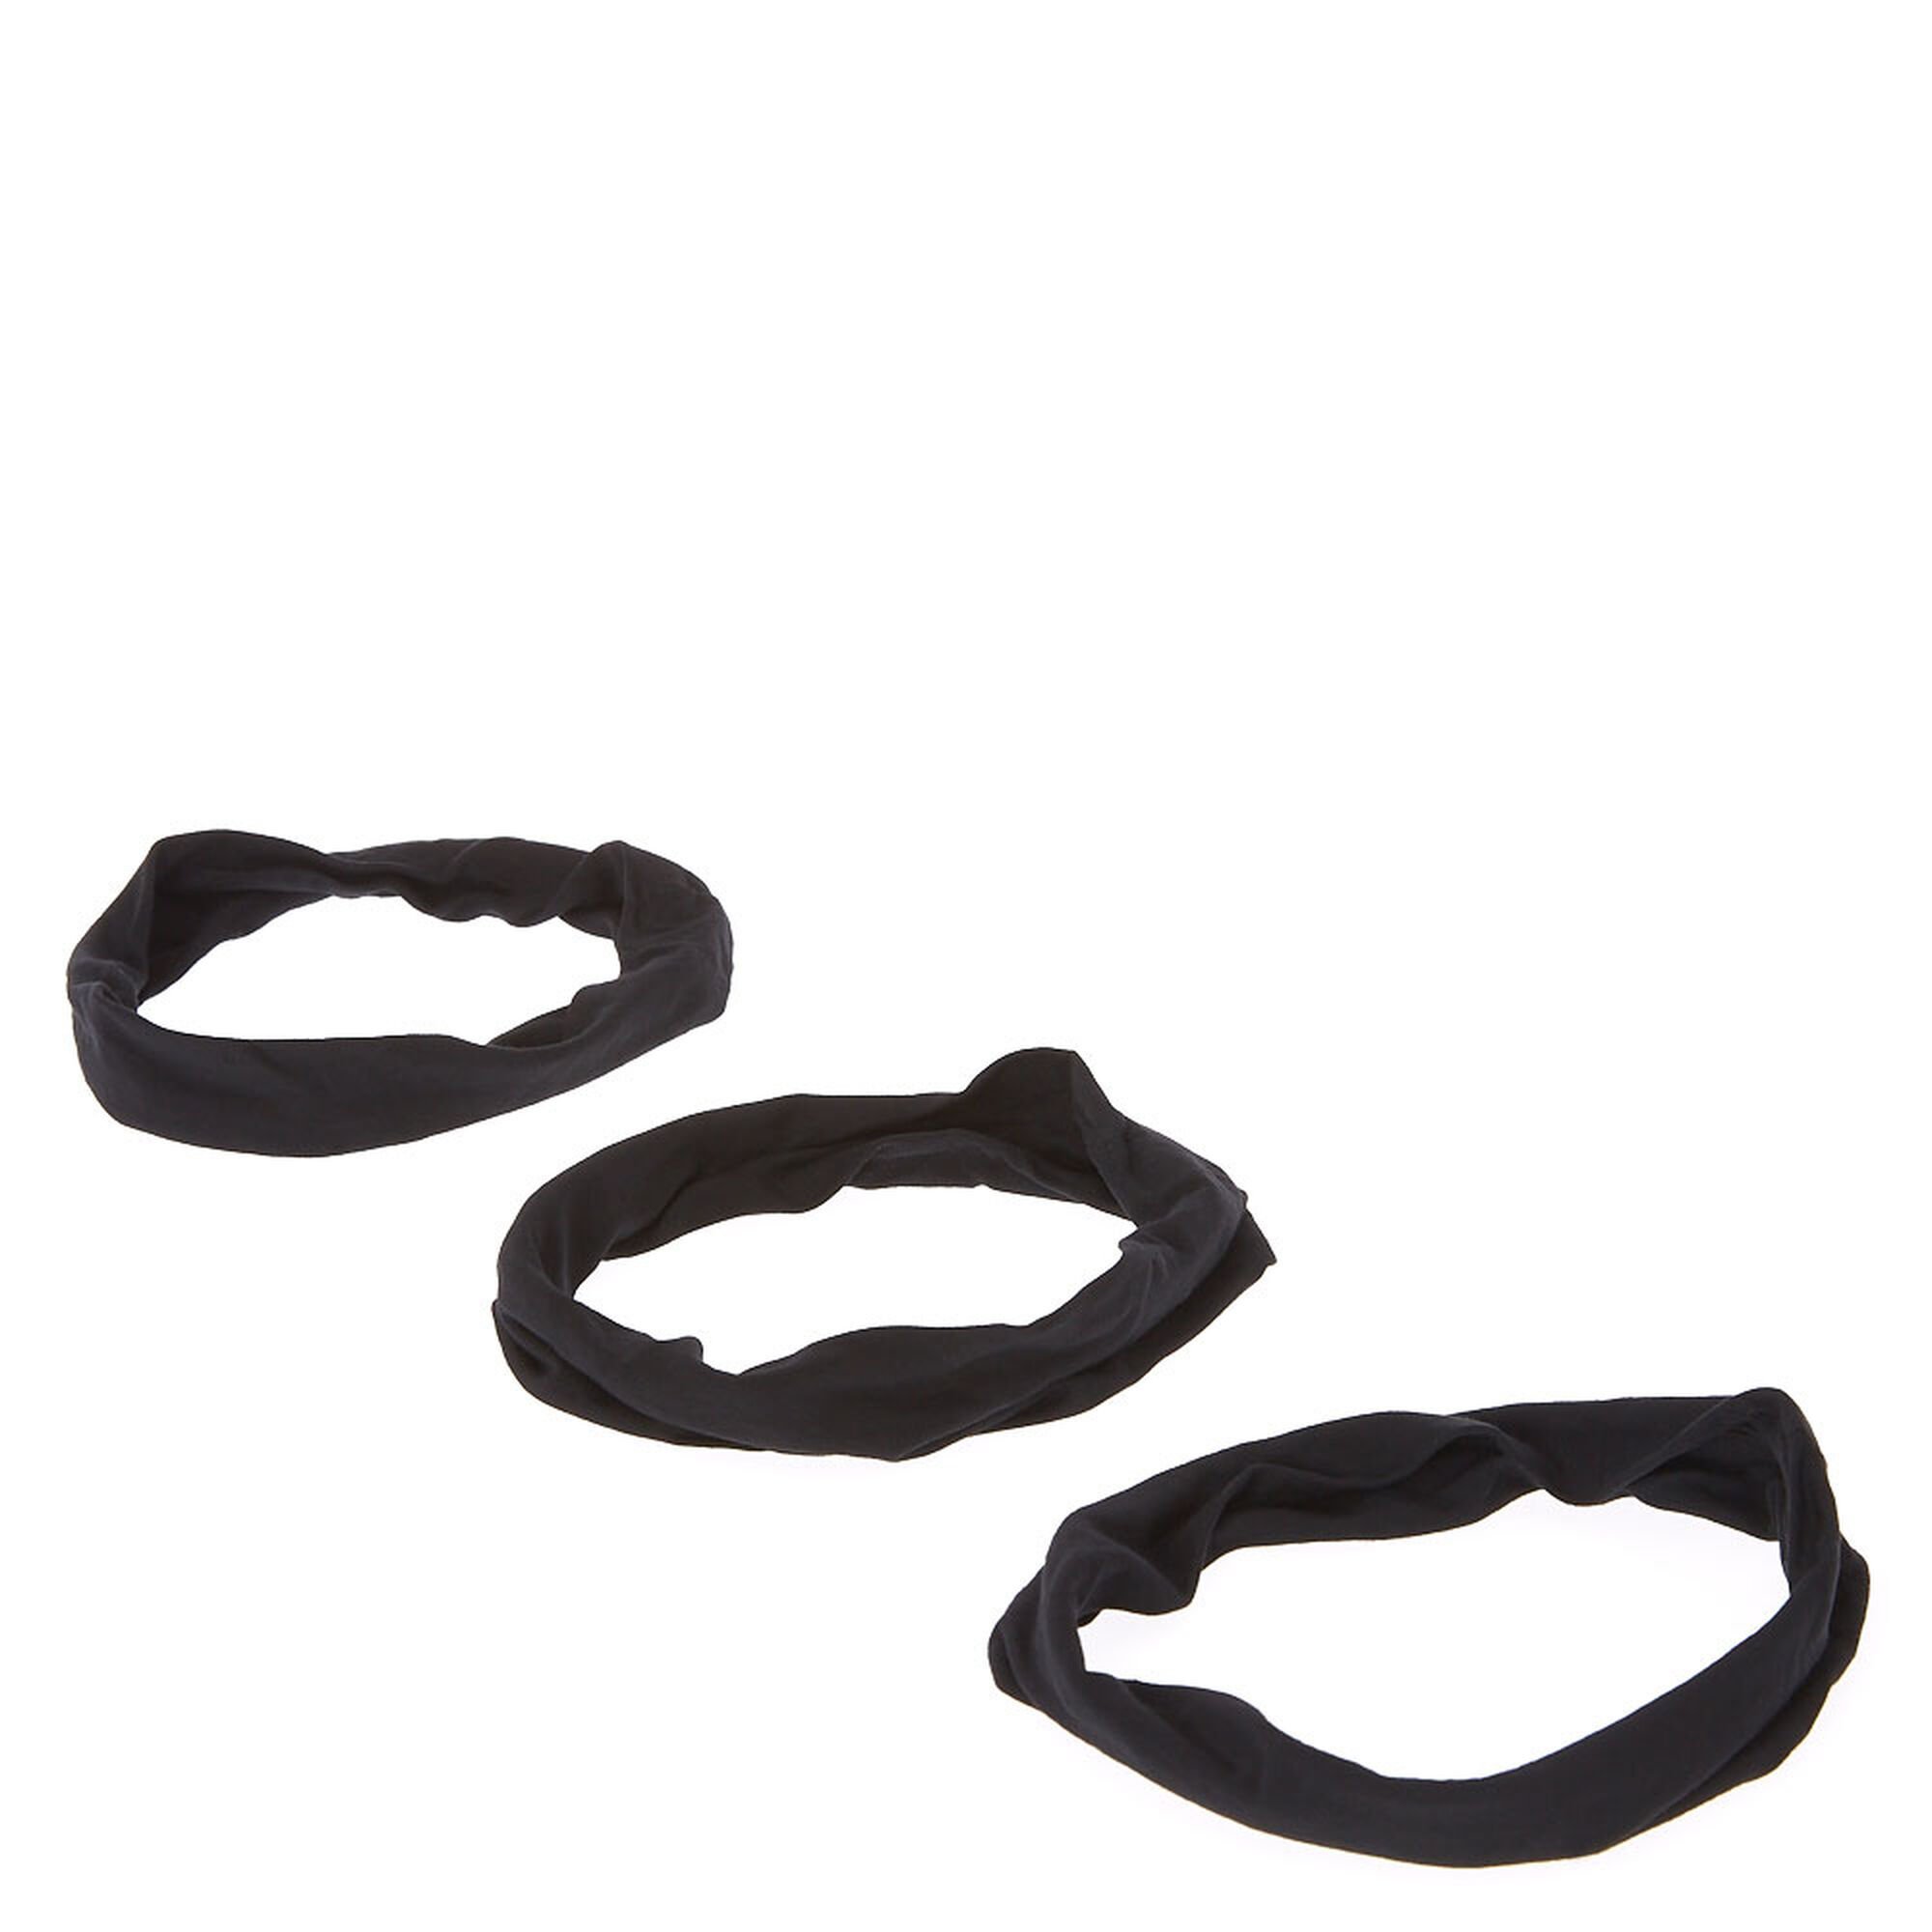 View Claires Solid Headwraps 3 Pack Black information